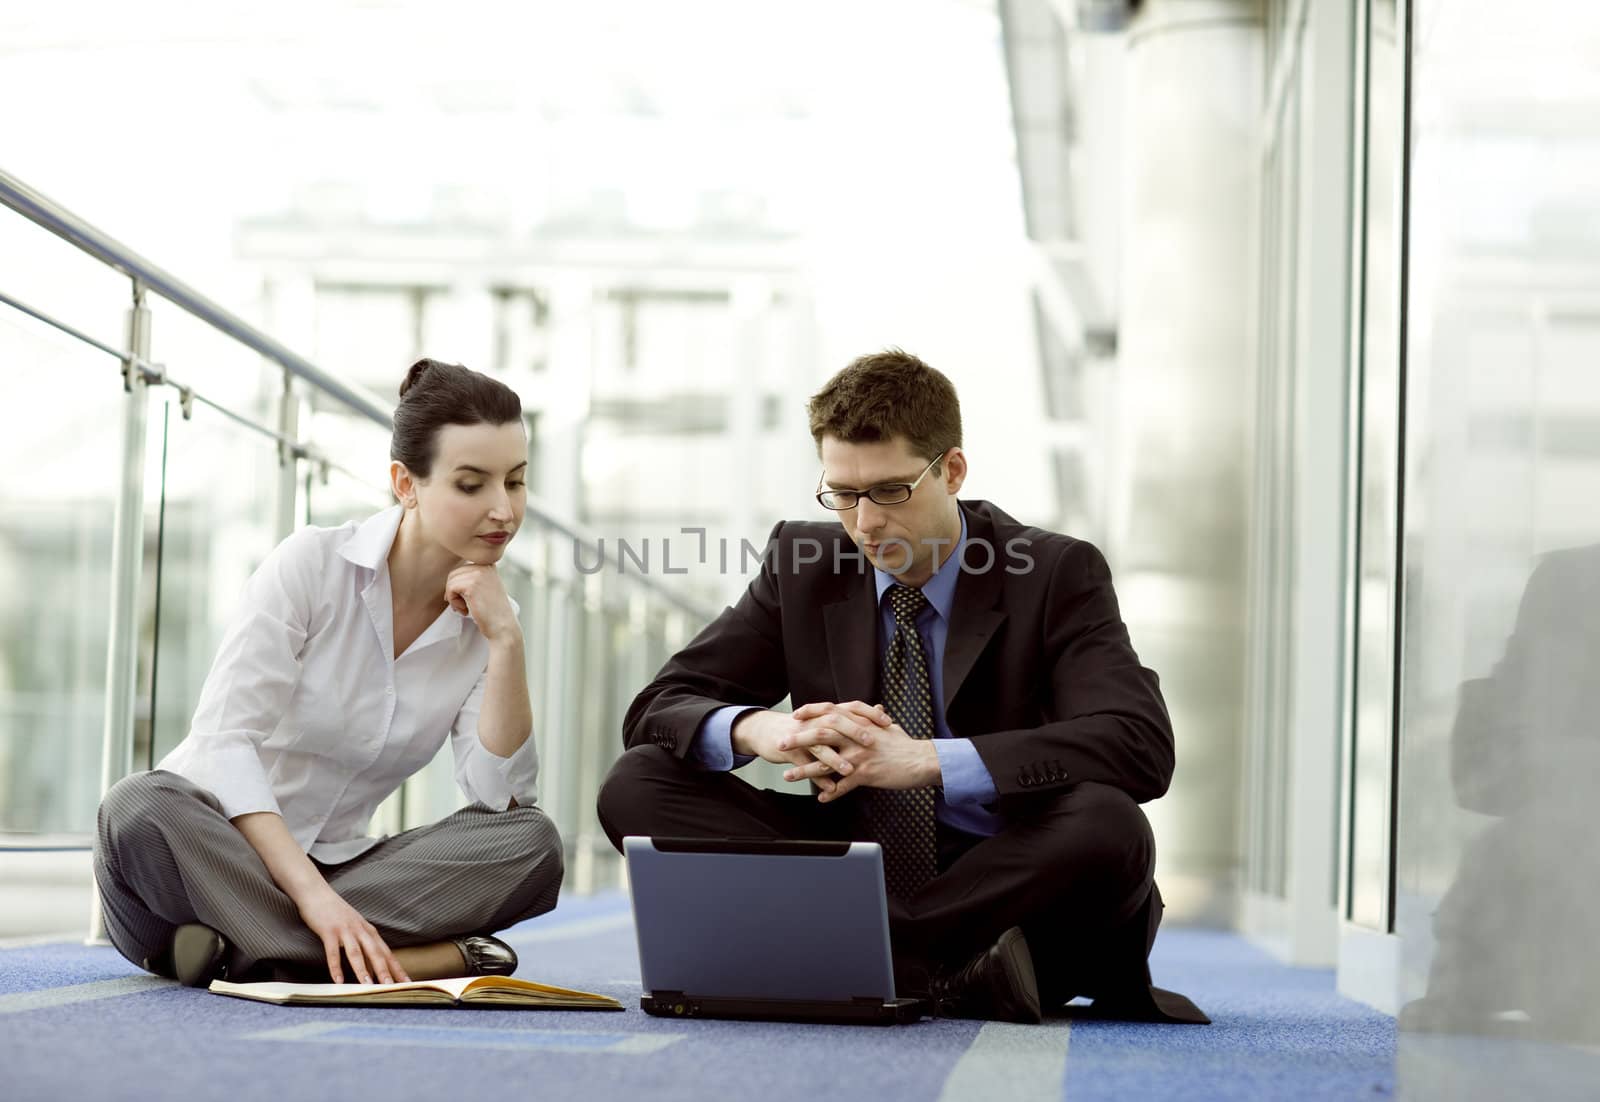 Businesscouple portrait - young man and woman working together on the floor of modern office corridor